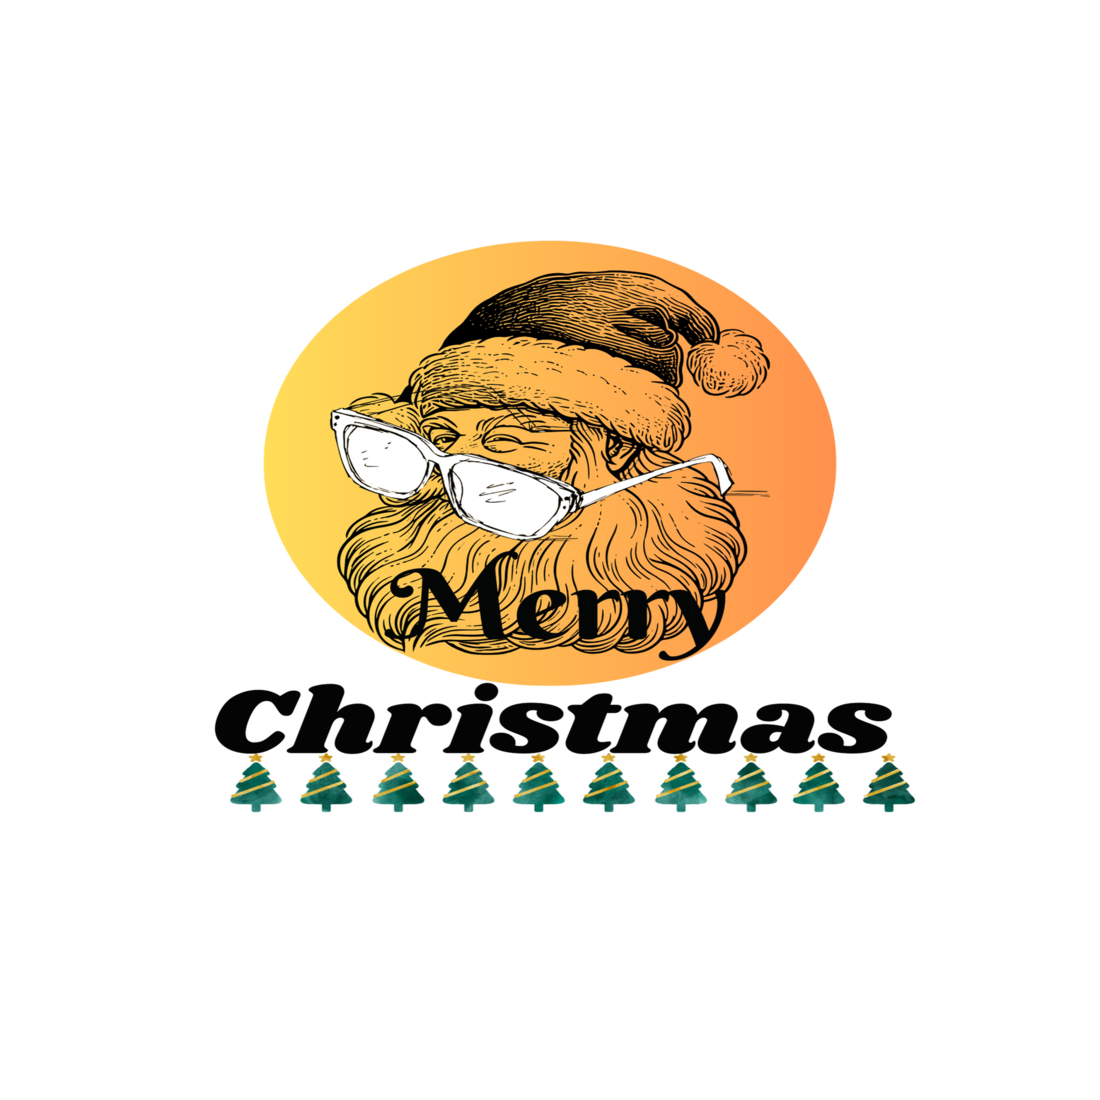 Merry Christmas t shirt, Vintage t shirt preview image.